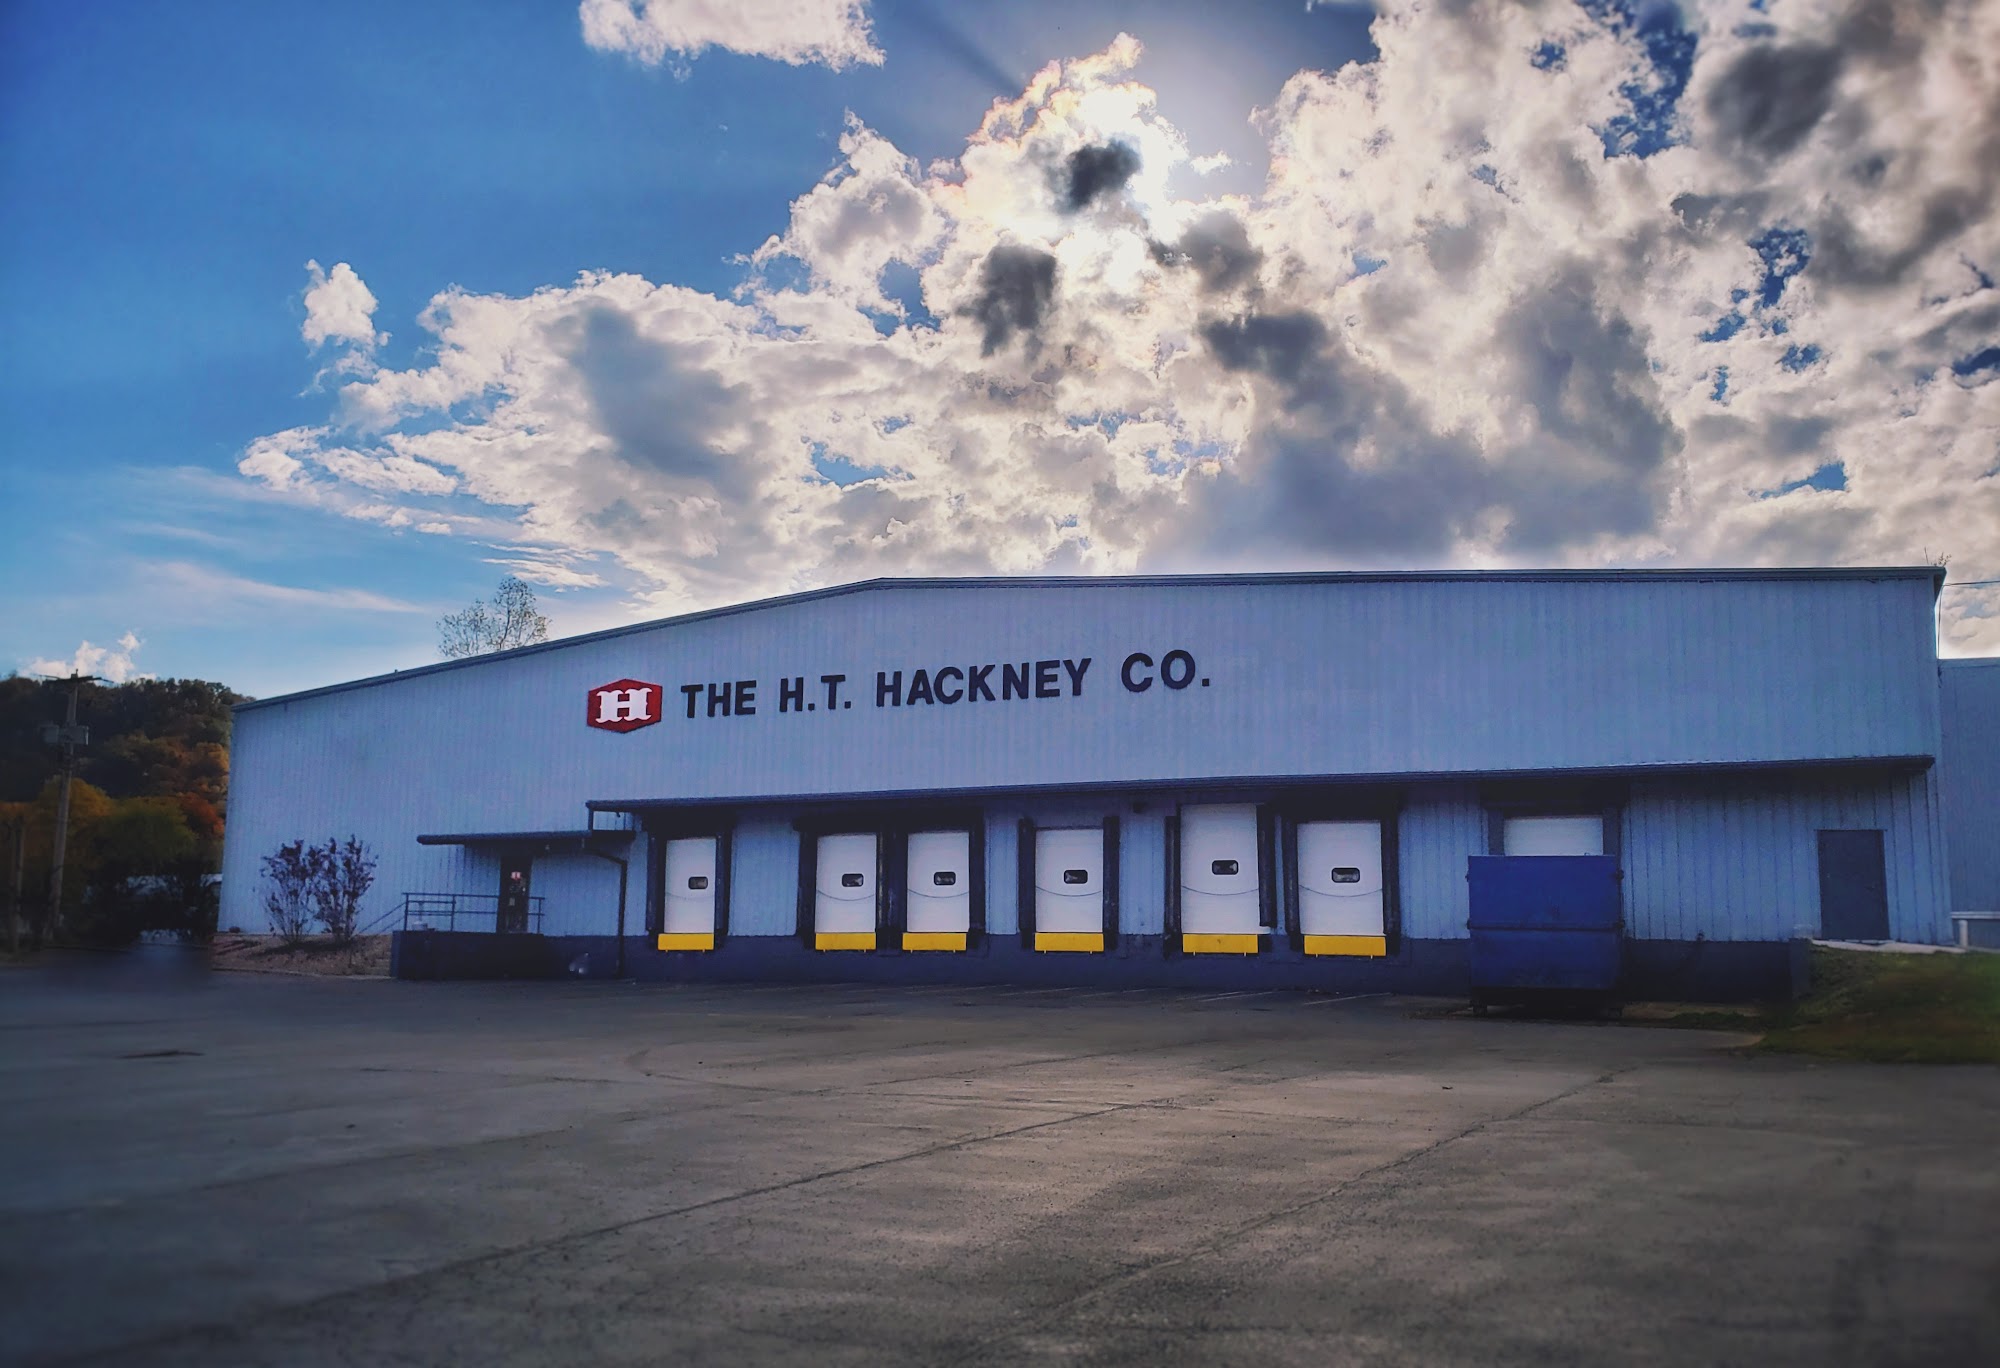 The H.T. Hackney Co.